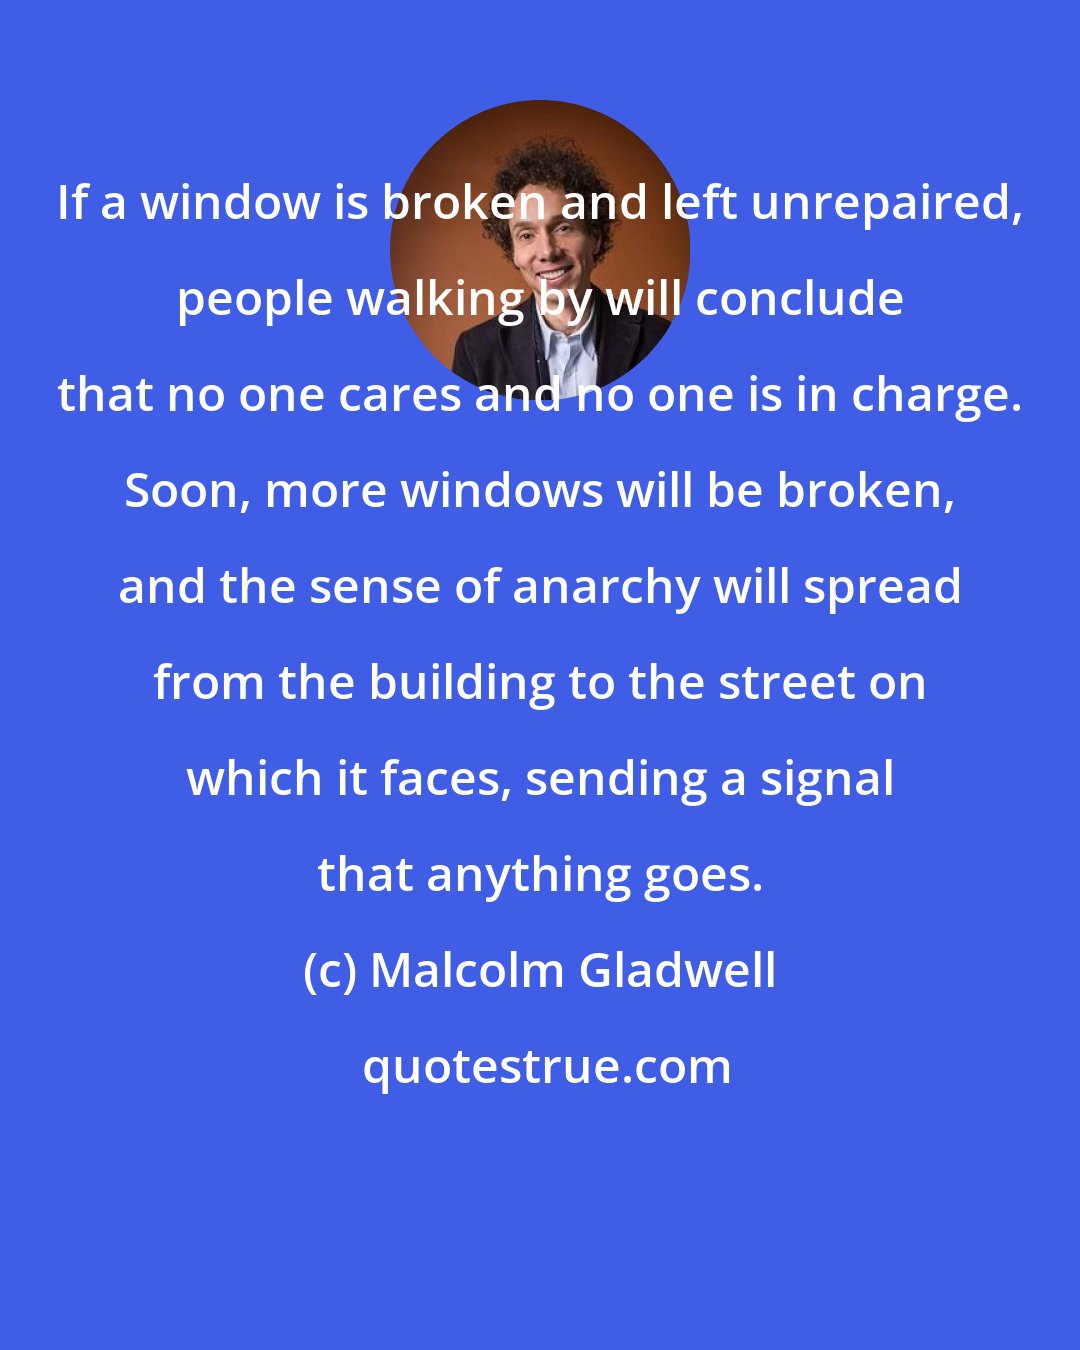 Malcolm Gladwell: If a window is broken and left unrepaired, people walking by will conclude that no one cares and no one is in charge. Soon, more windows will be broken, and the sense of anarchy will spread from the building to the street on which it faces, sending a signal that anything goes.